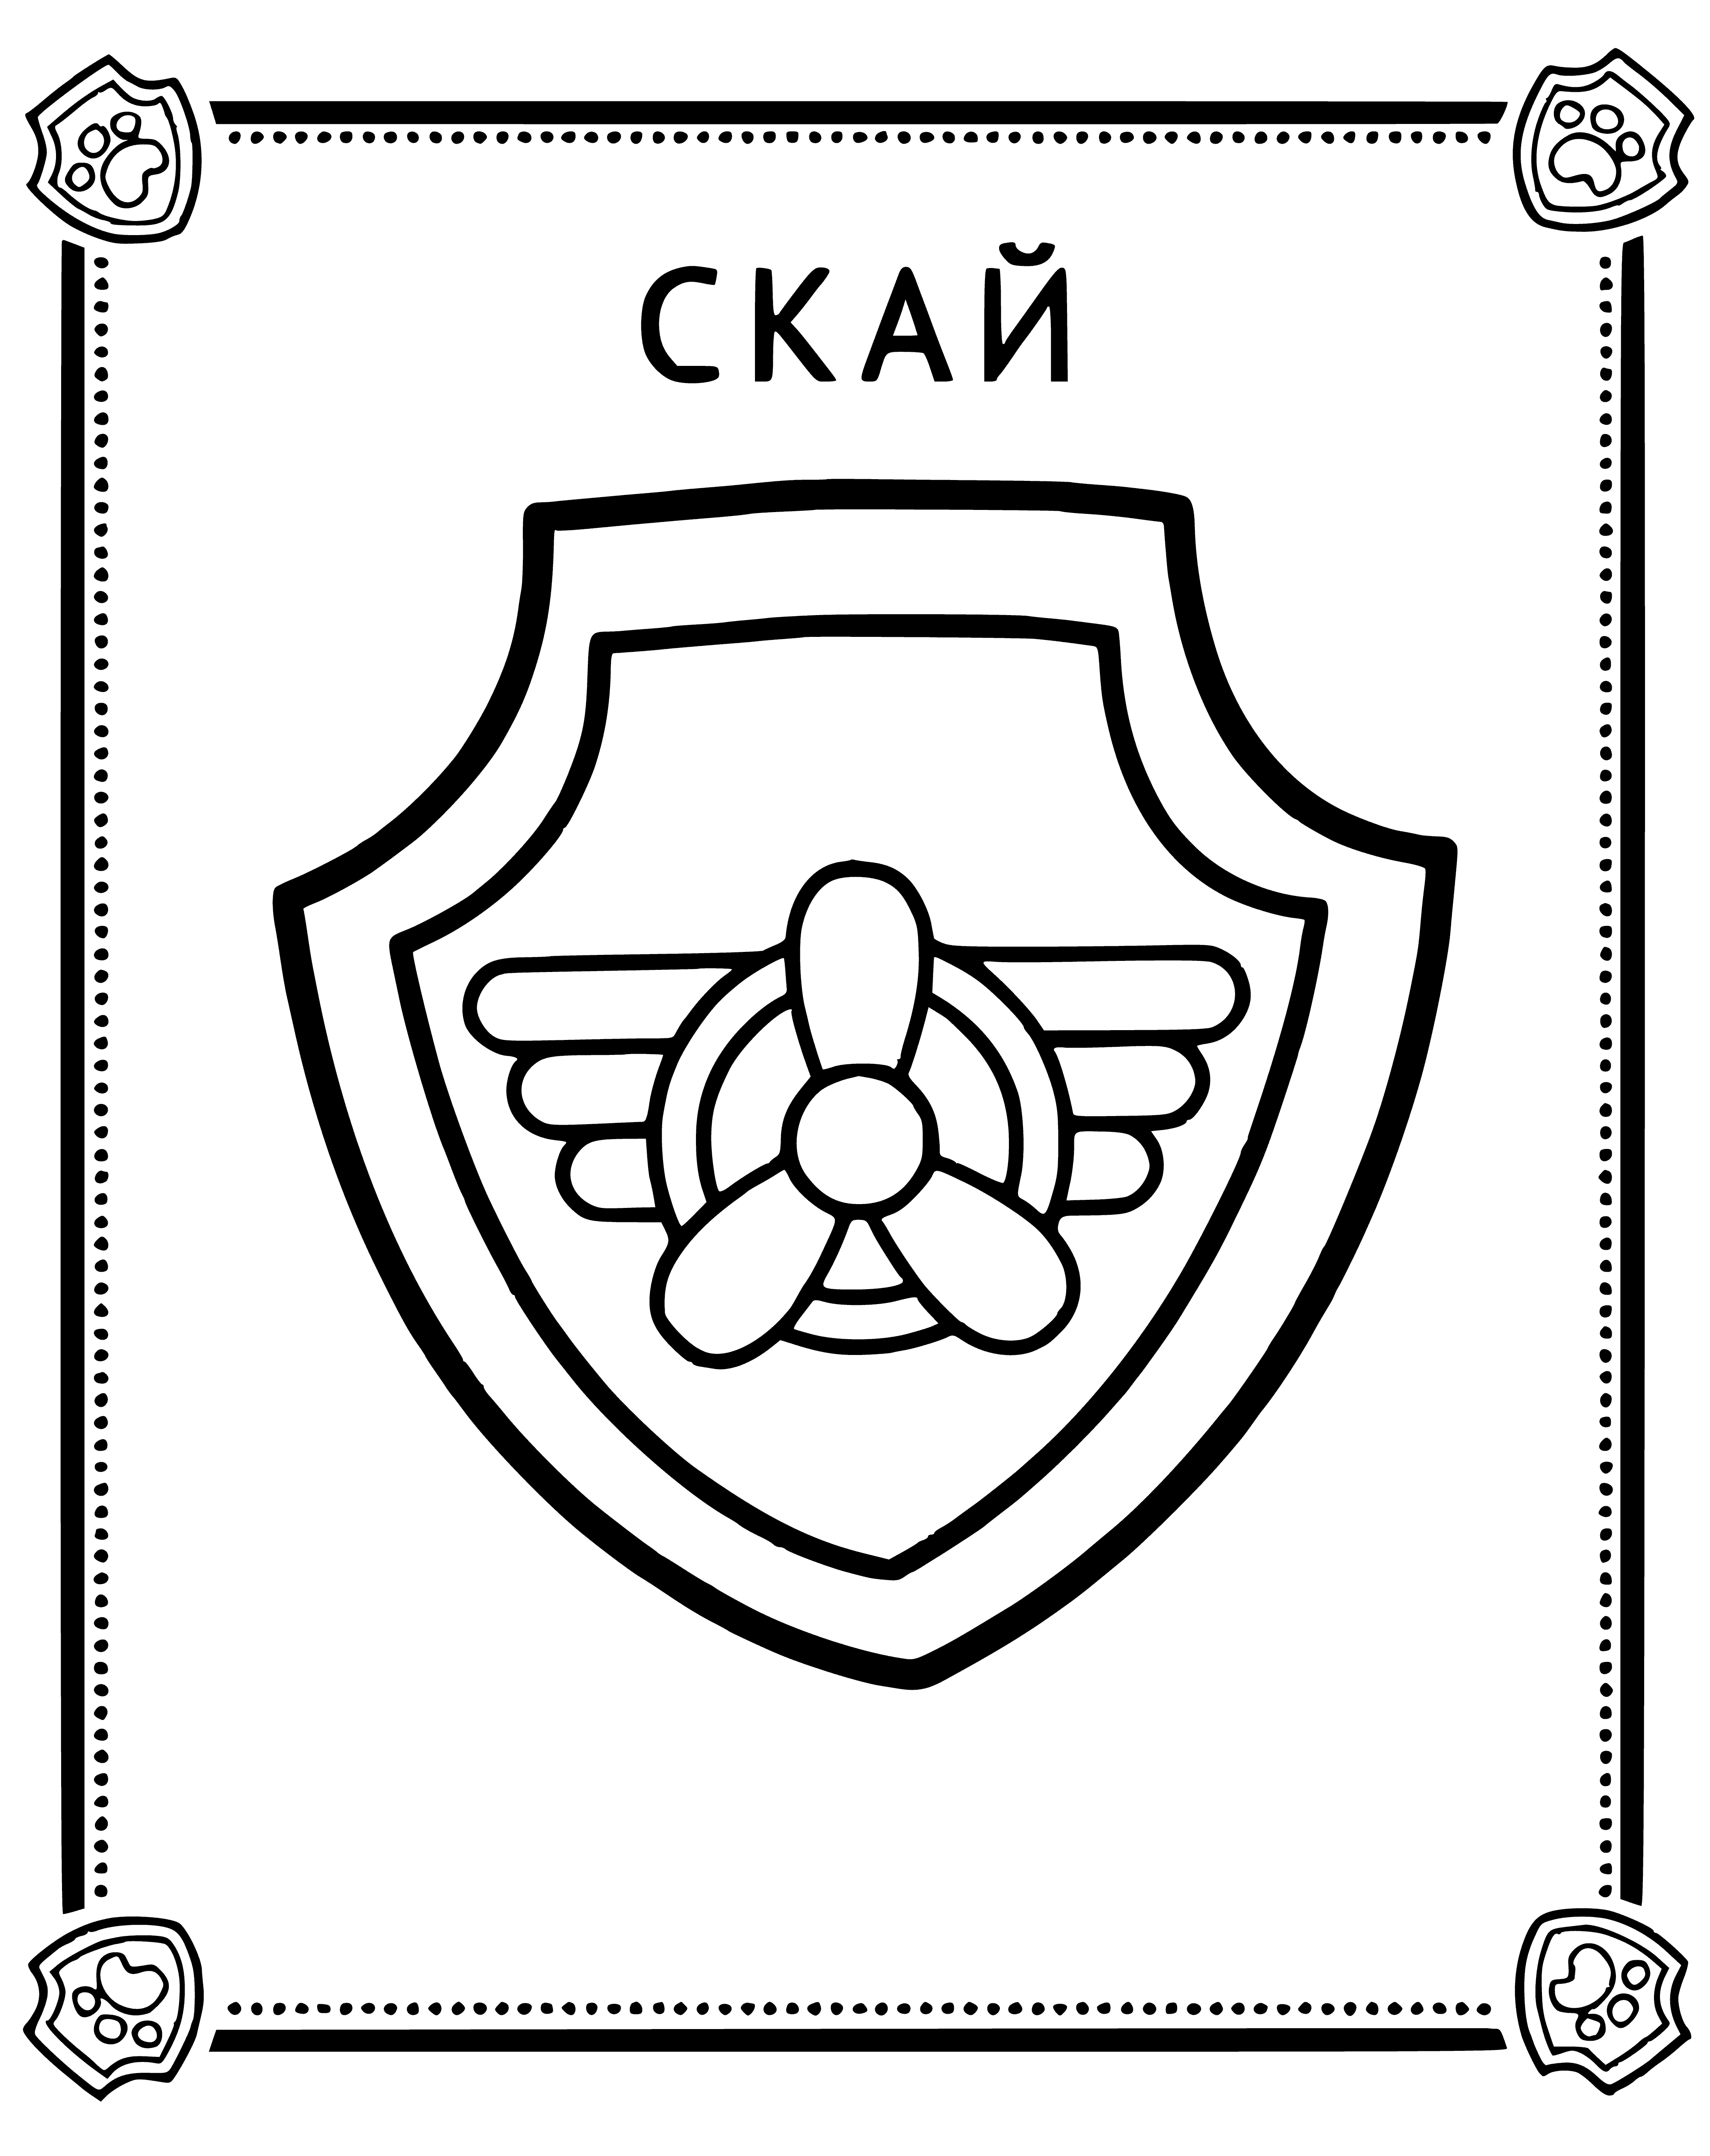 Skye sign coloring page